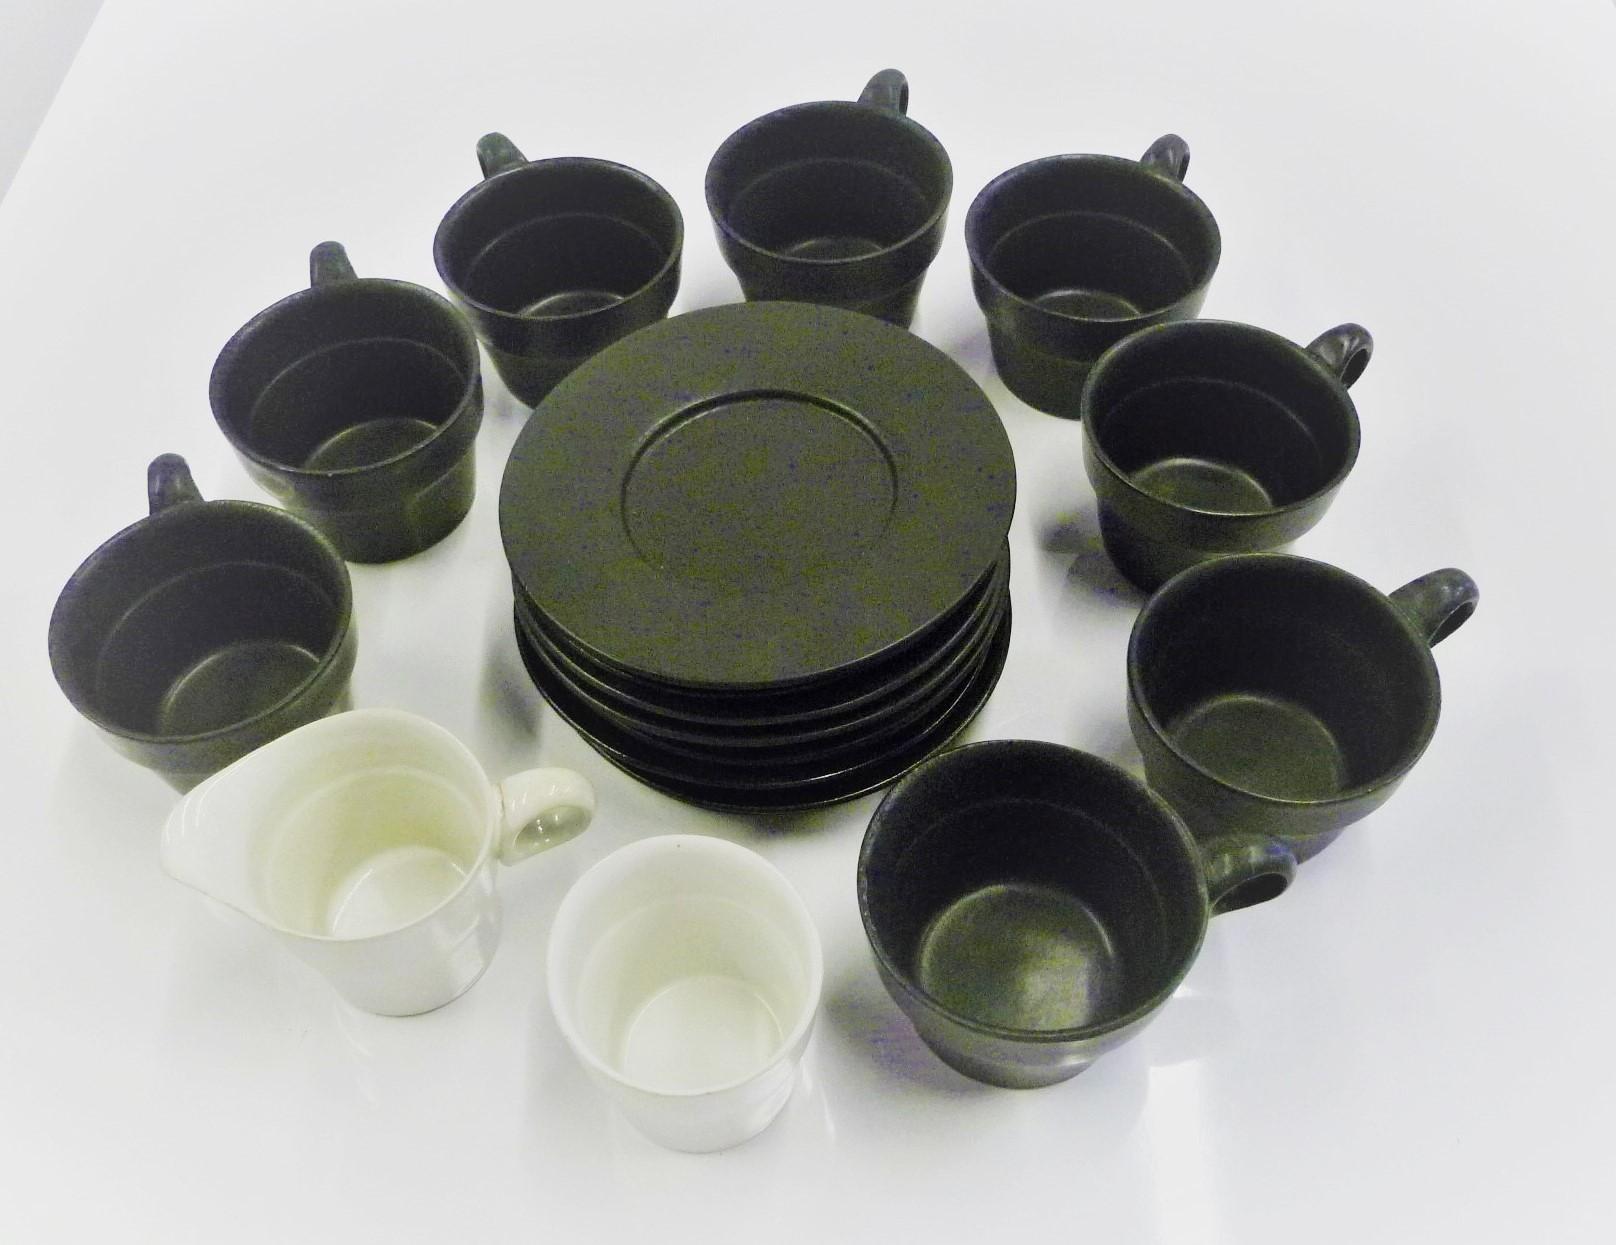 Designed by David Gil (1922-2002) for his company Bennington Potters of Vermont, a set of 8 Matte black cups #1760 and saucers #1627 and Matte white sugar #1769 and creamer #1768. These are handmade stoneware pieces from the 1960s, each an